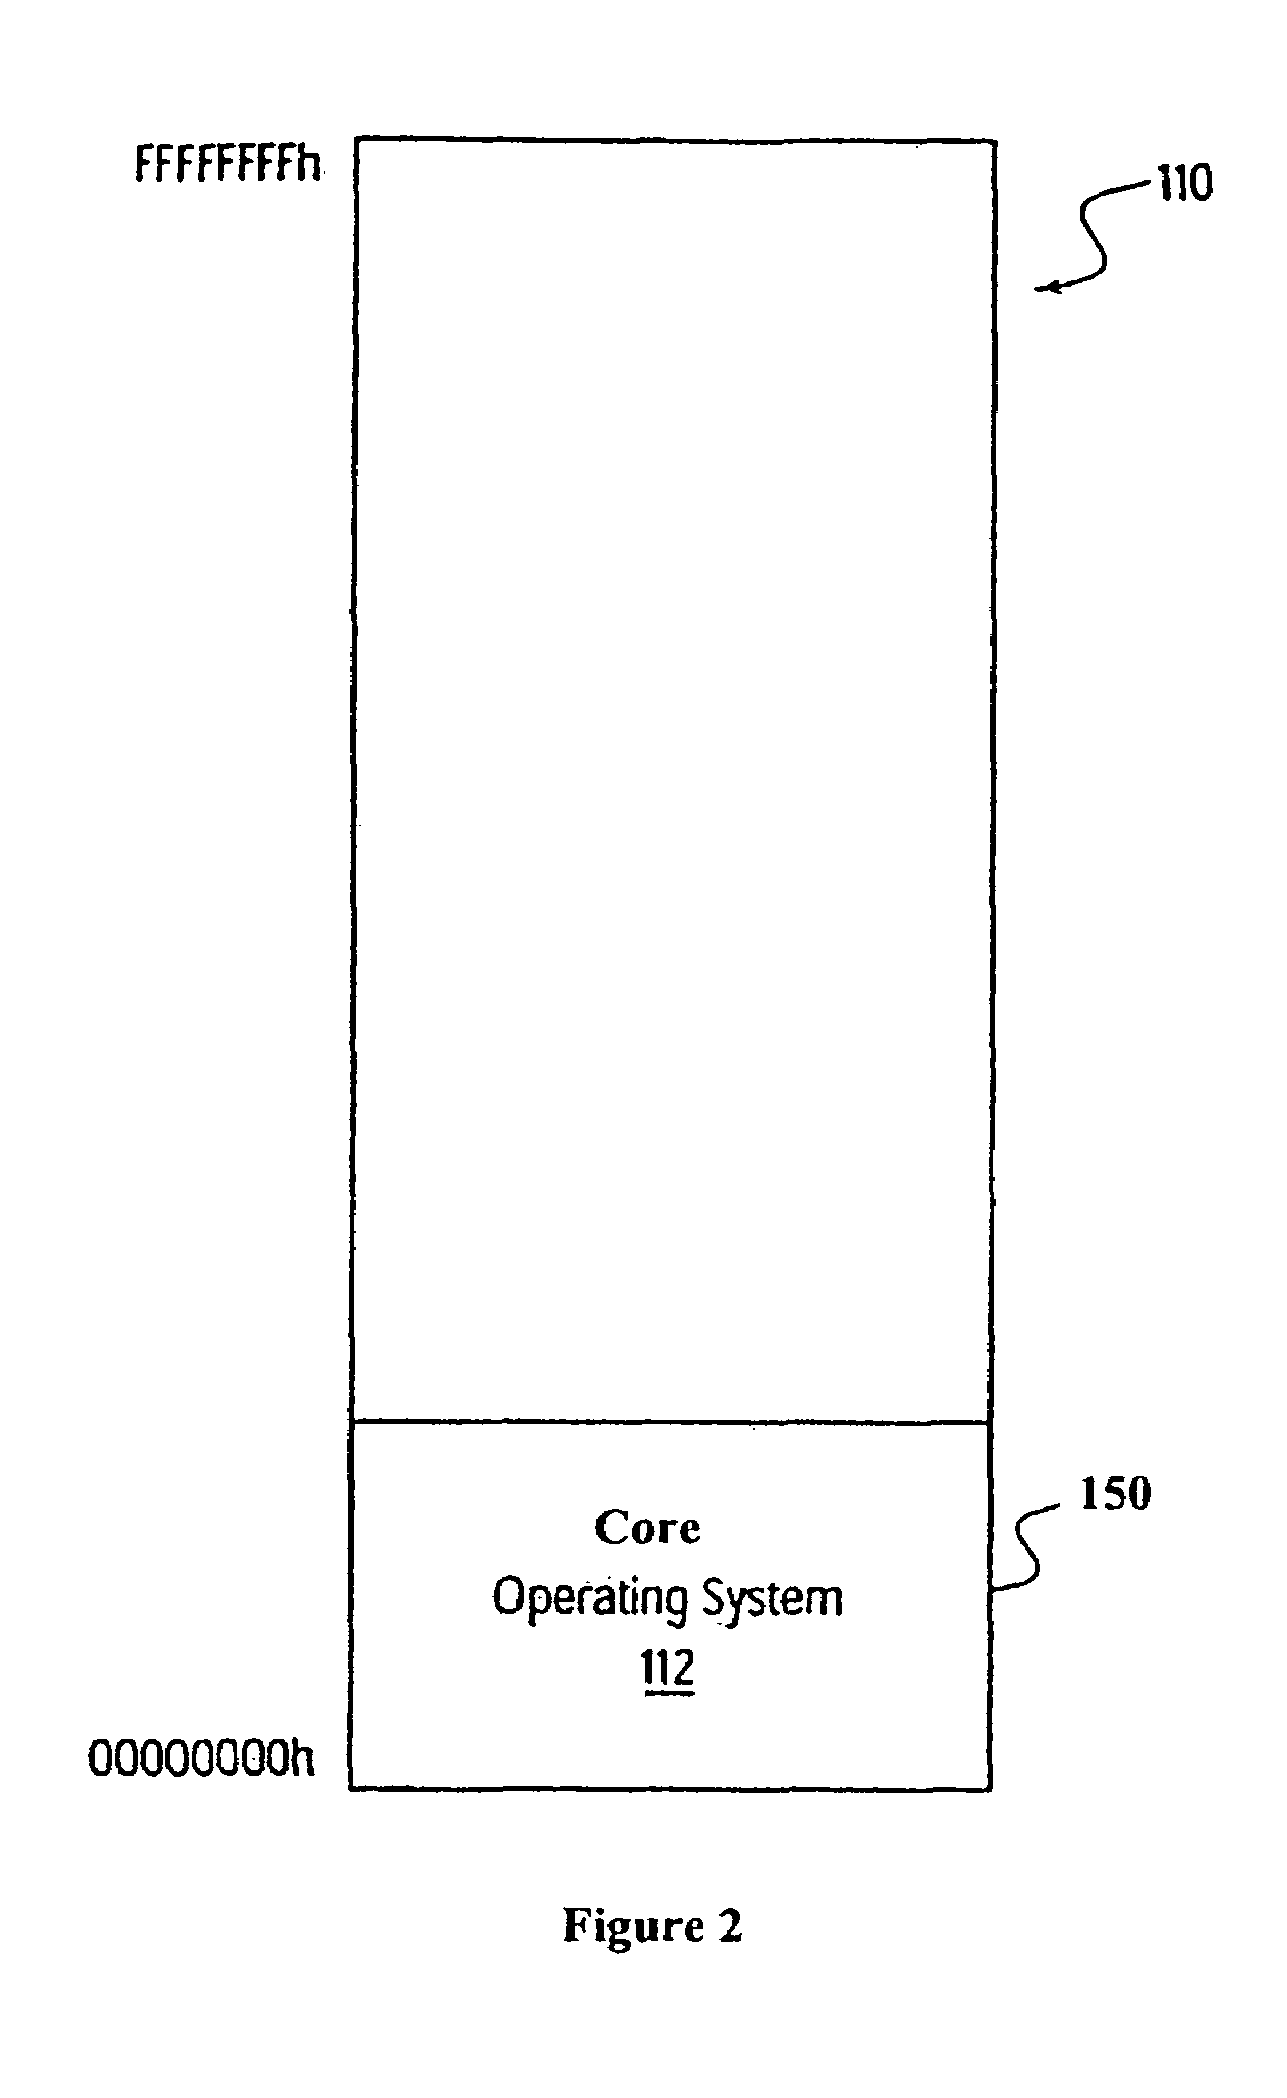 Two-level operating system architecture